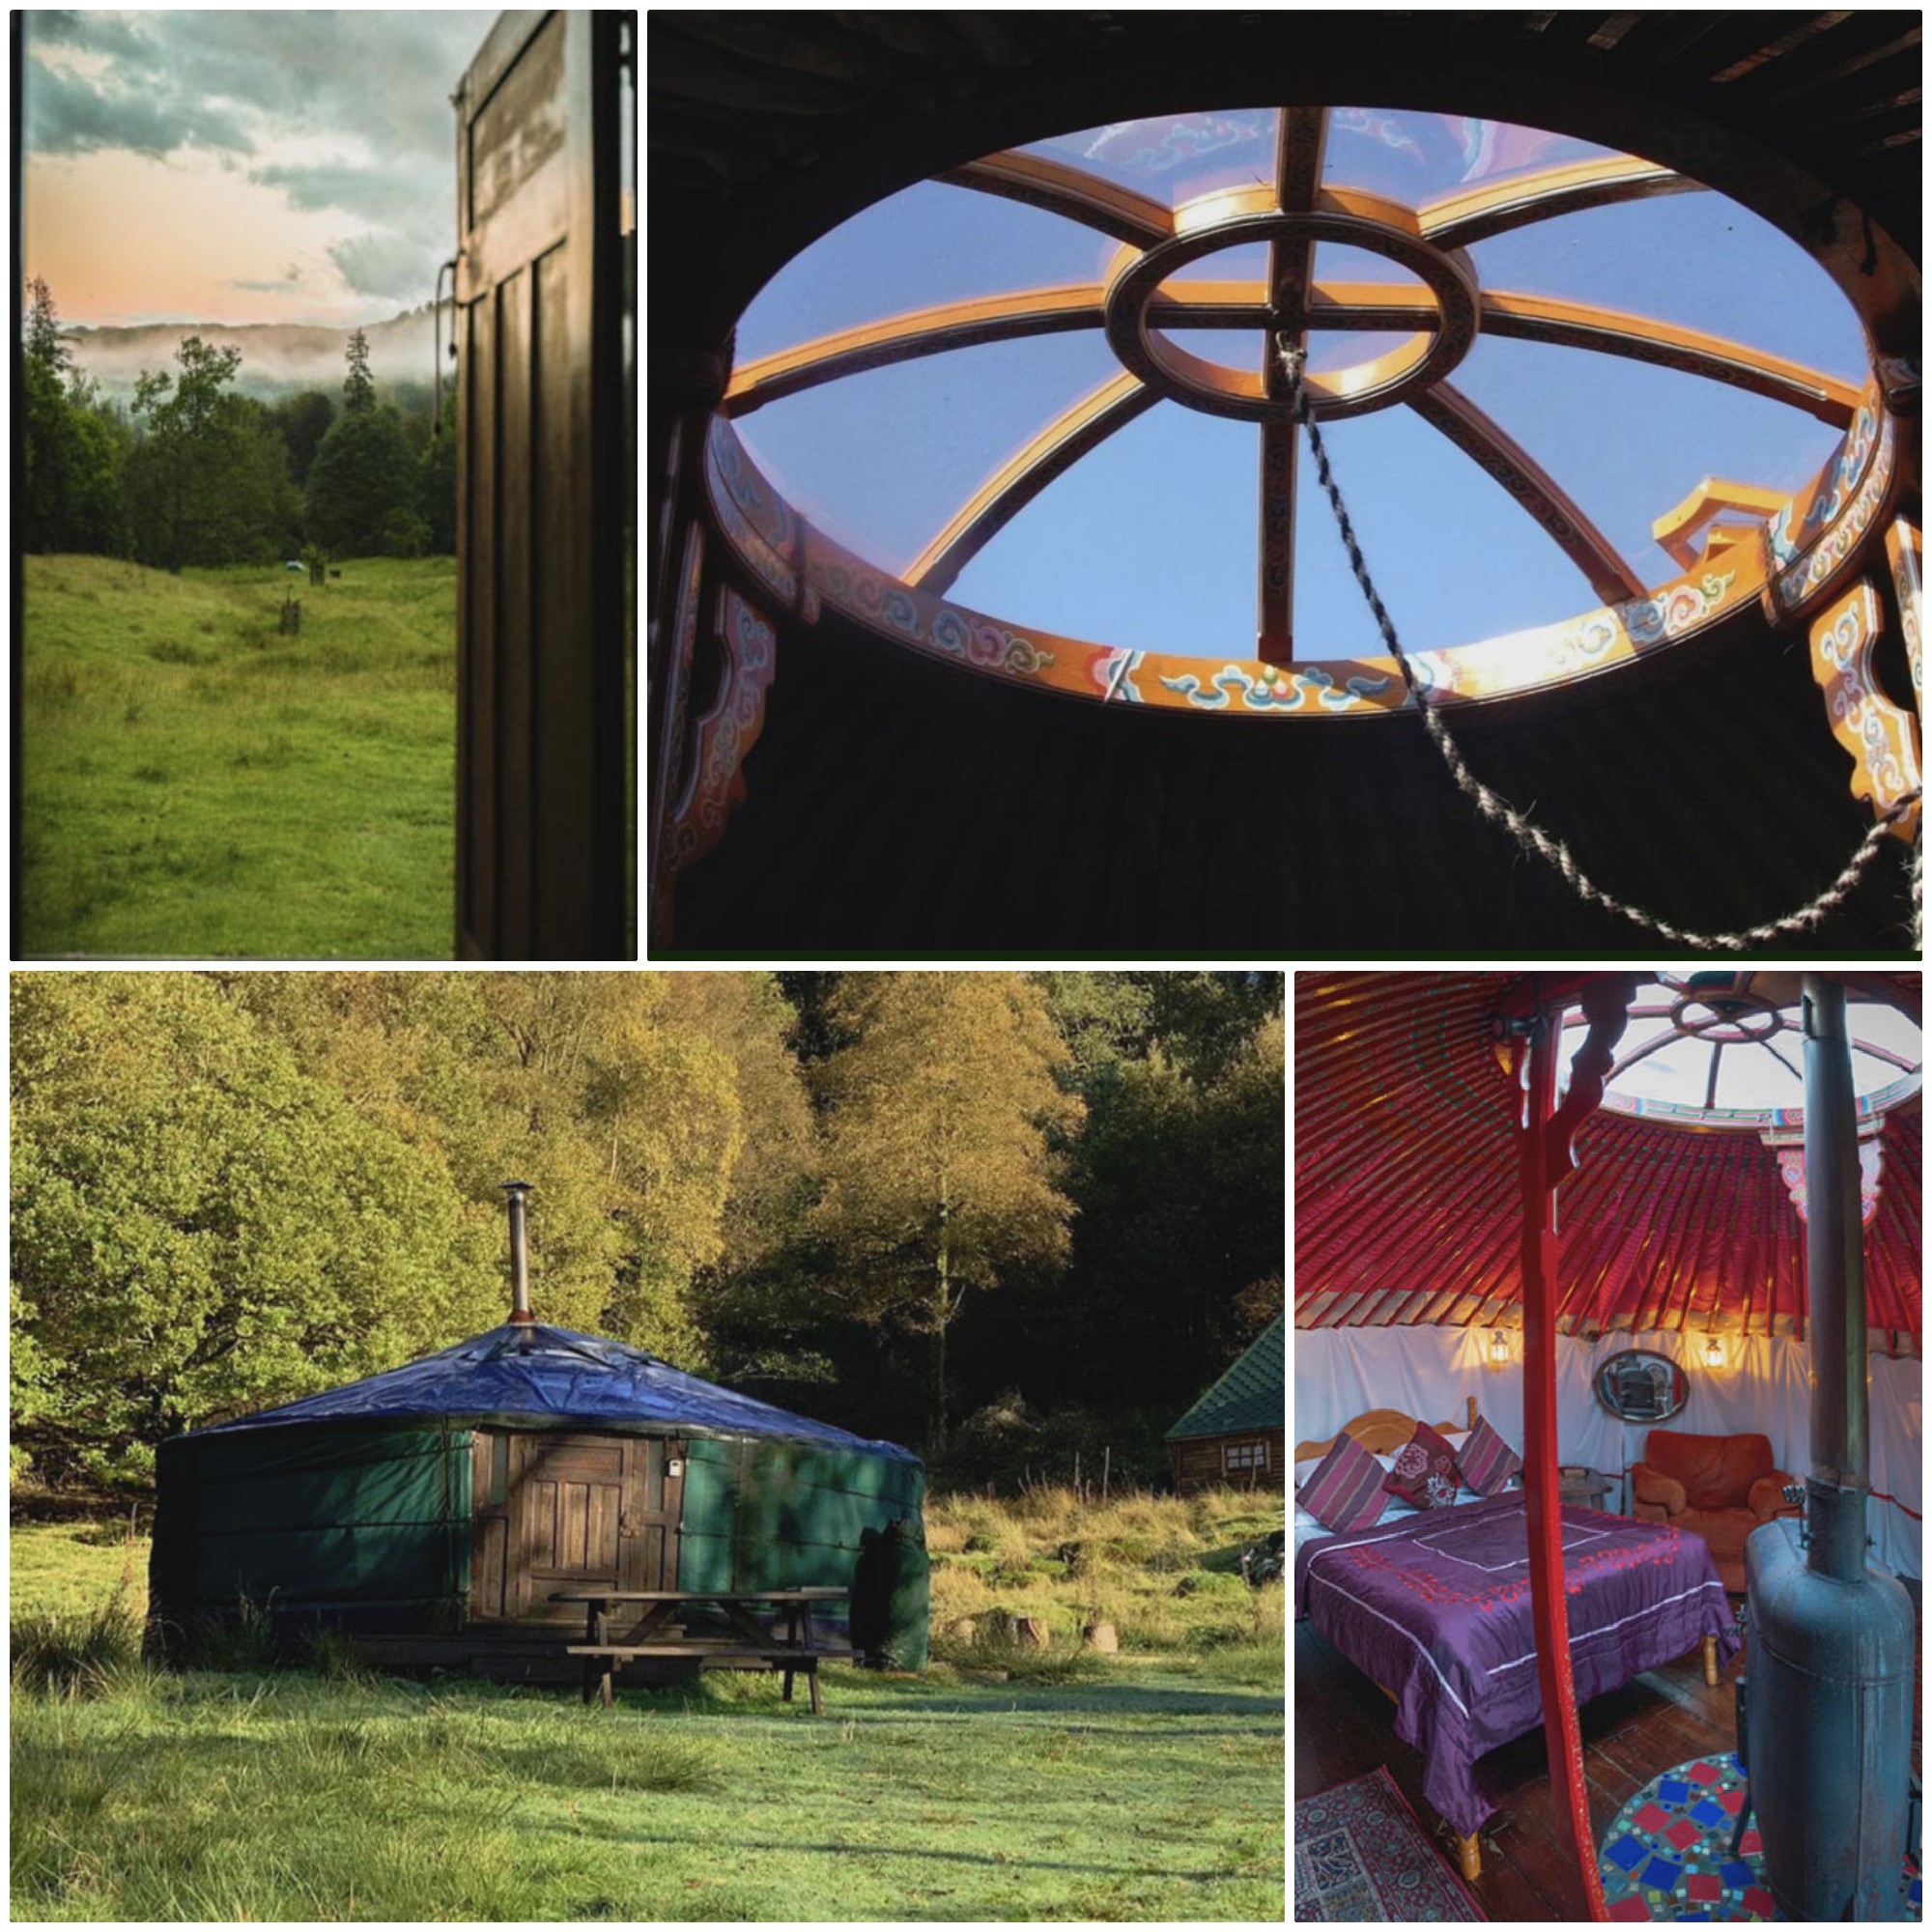 set in the wonderful grounds of Rydal Hall, these Mongolian Yurts allow you to unwind and enjoy the tranquility of nature